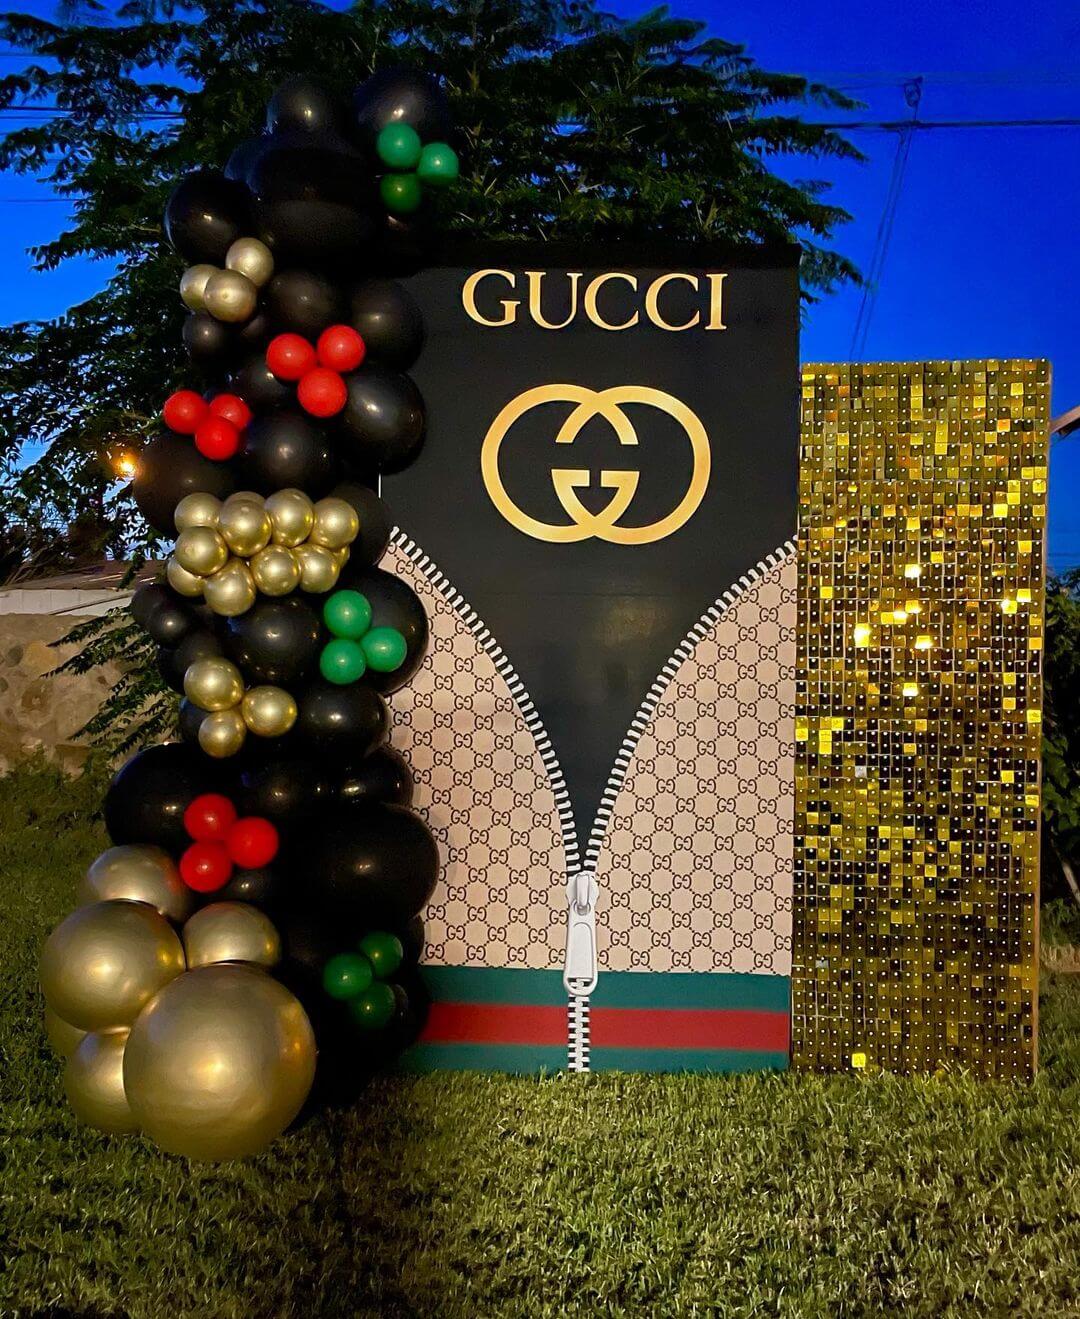 Gucci themed party ideas